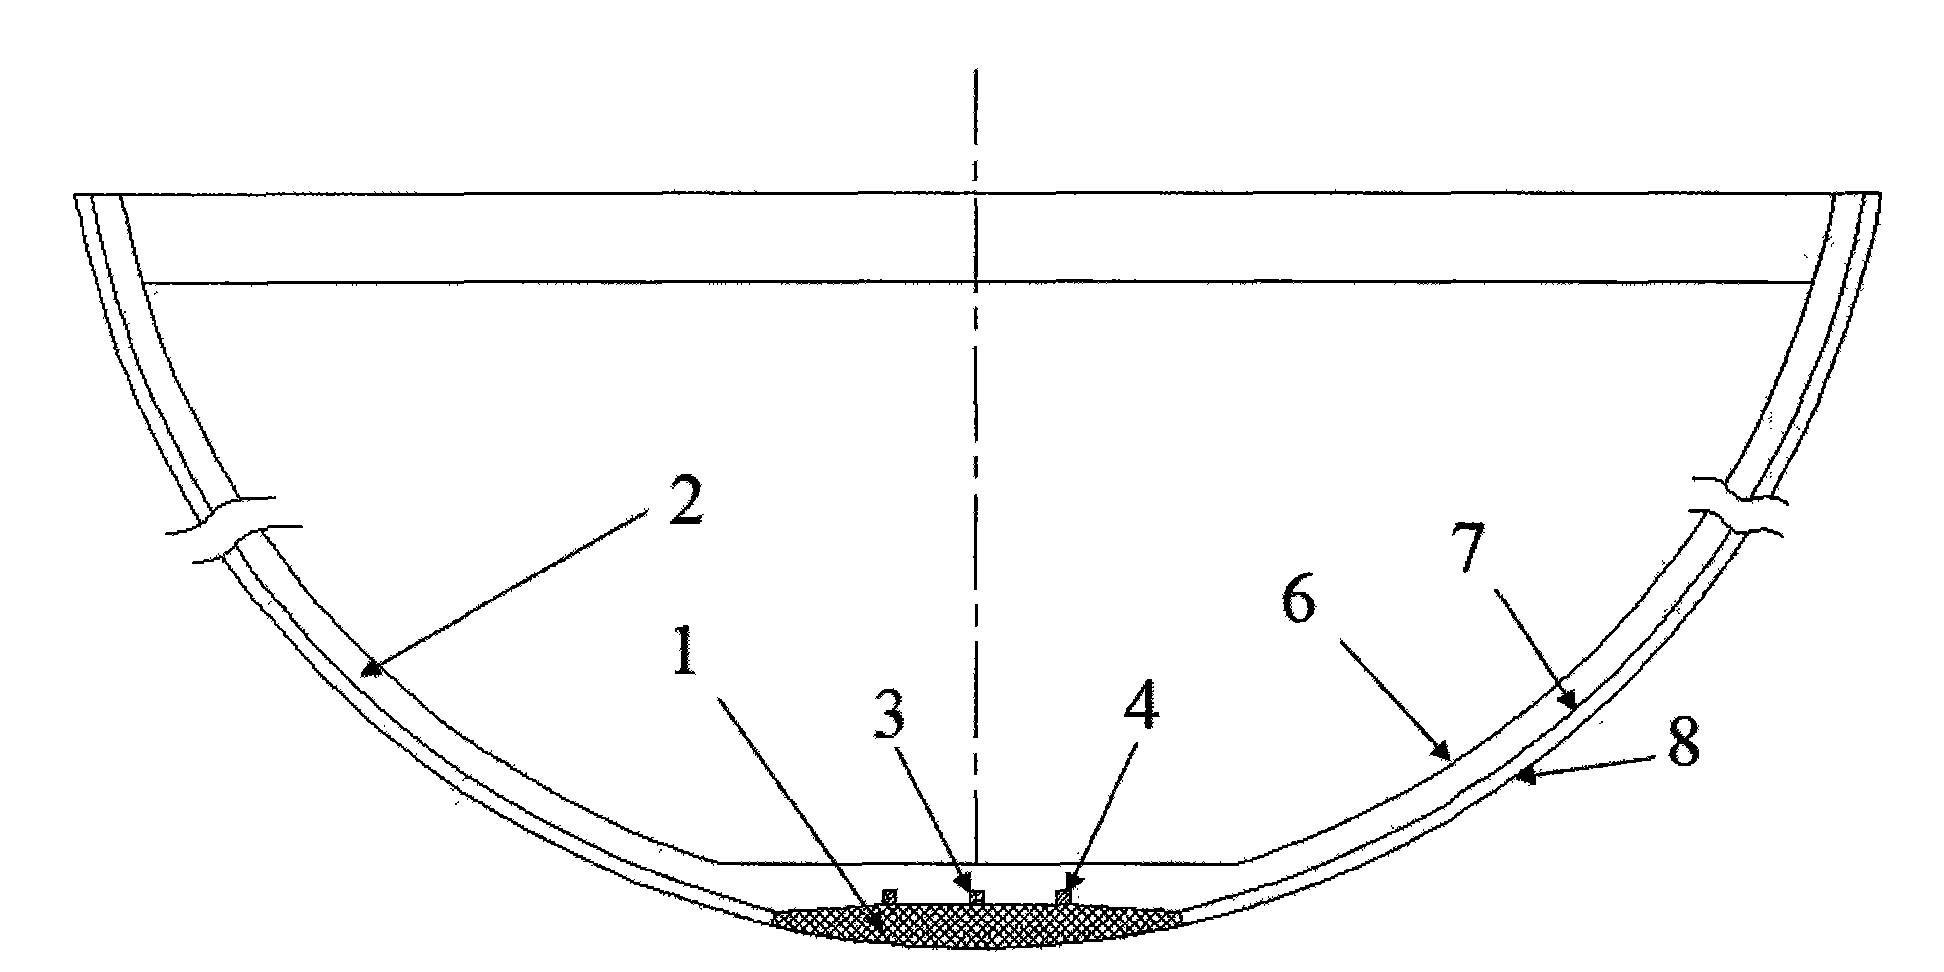 Civil aircraft fuselage bottom structure based on impact strength tests